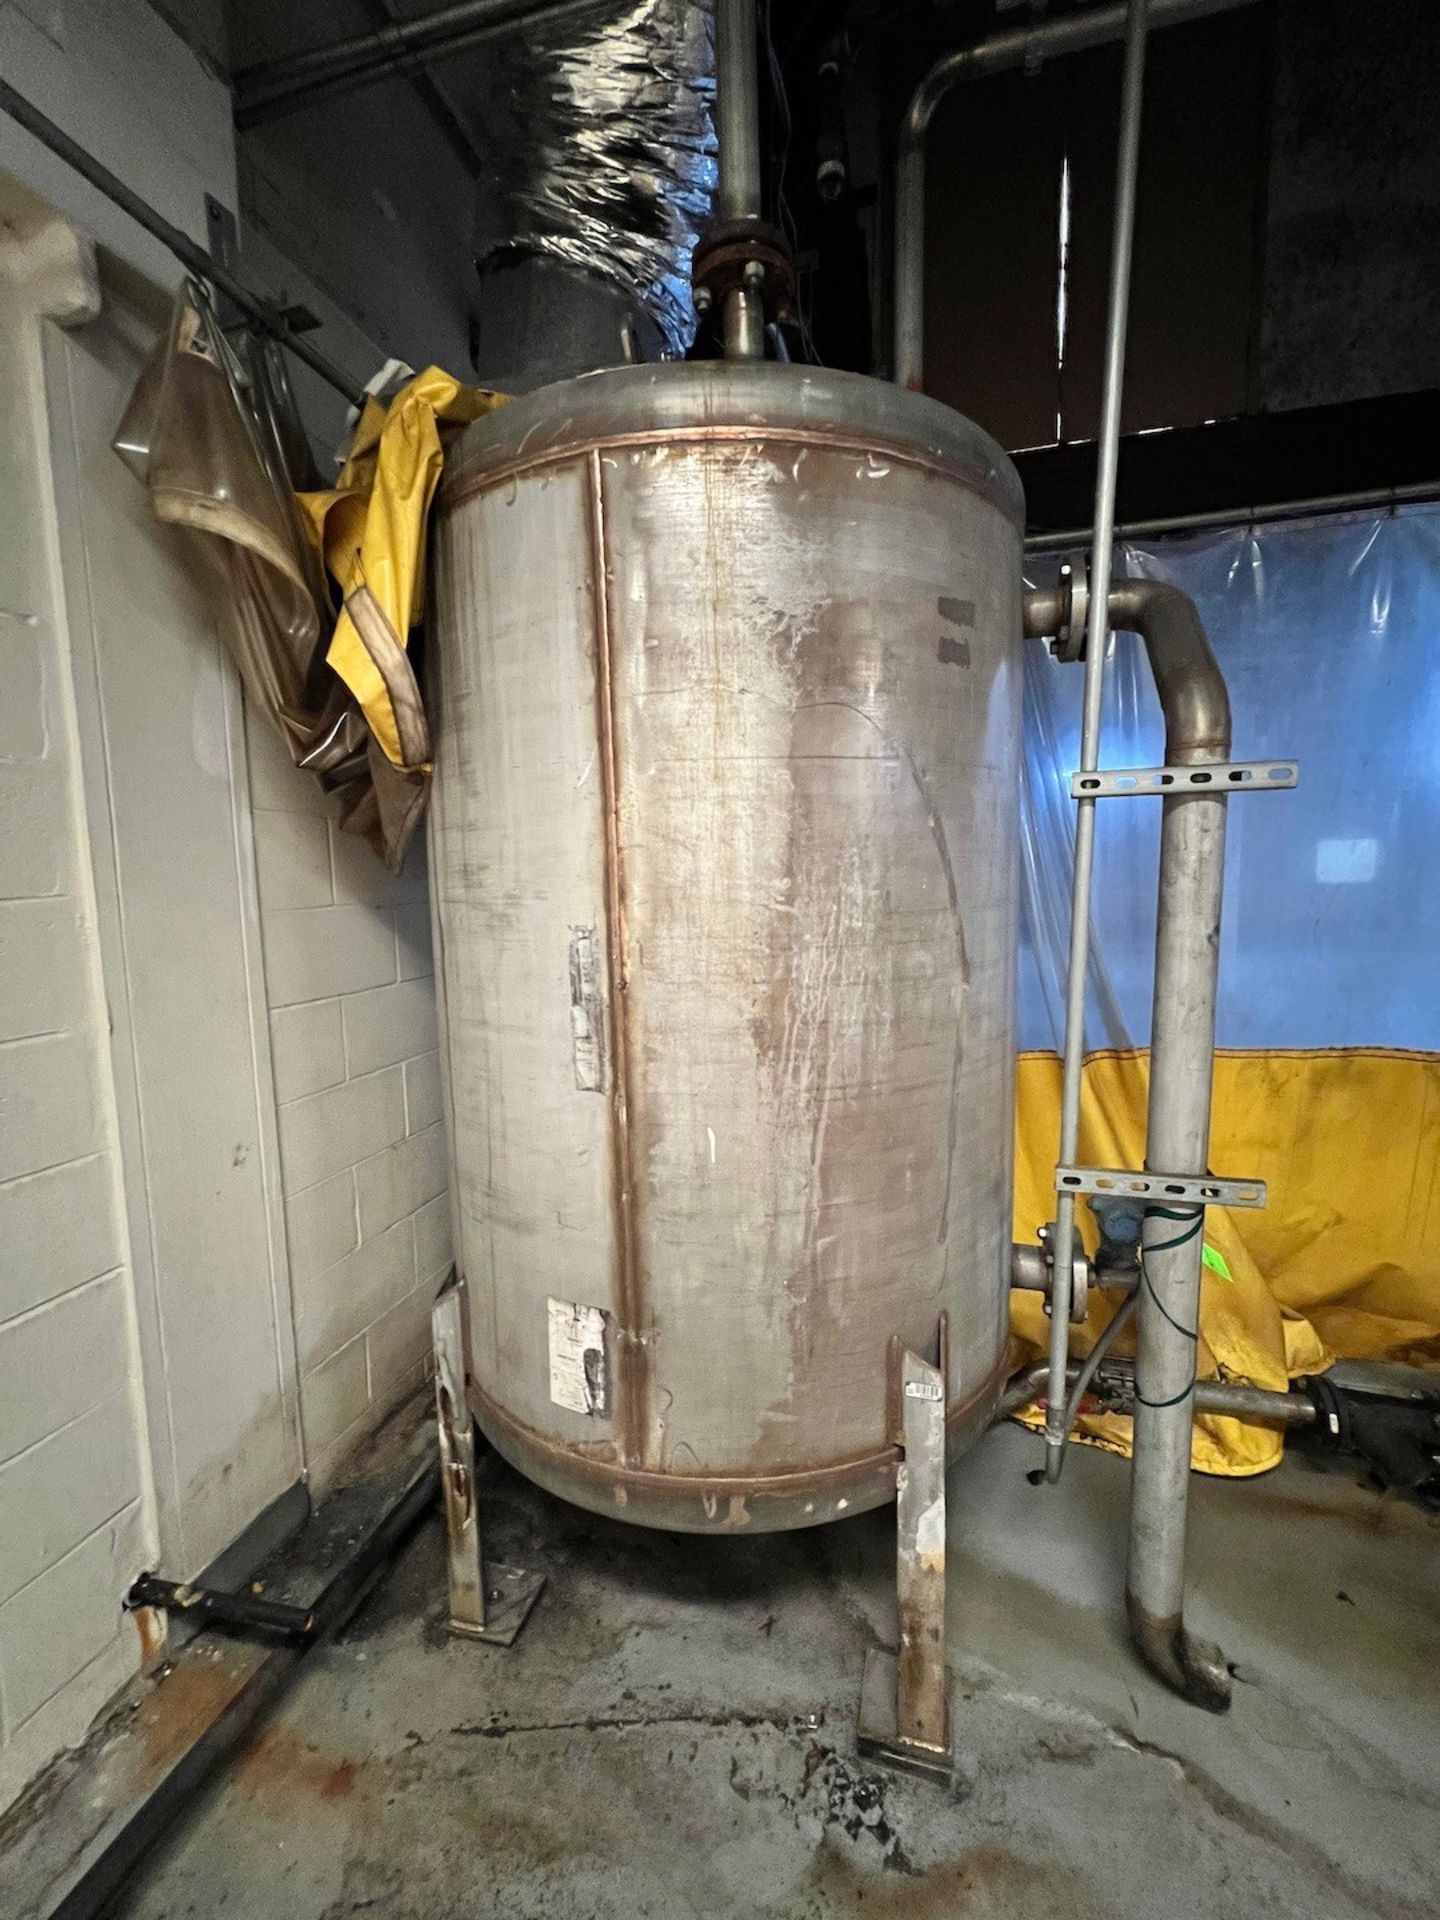 APPROX. 500 GALLON S/S TANK, APPROX. DIMS: 48 IN. DIA X 60 IN. L (SIMPLE LOADING FEE $550) - Bild 2 aus 5